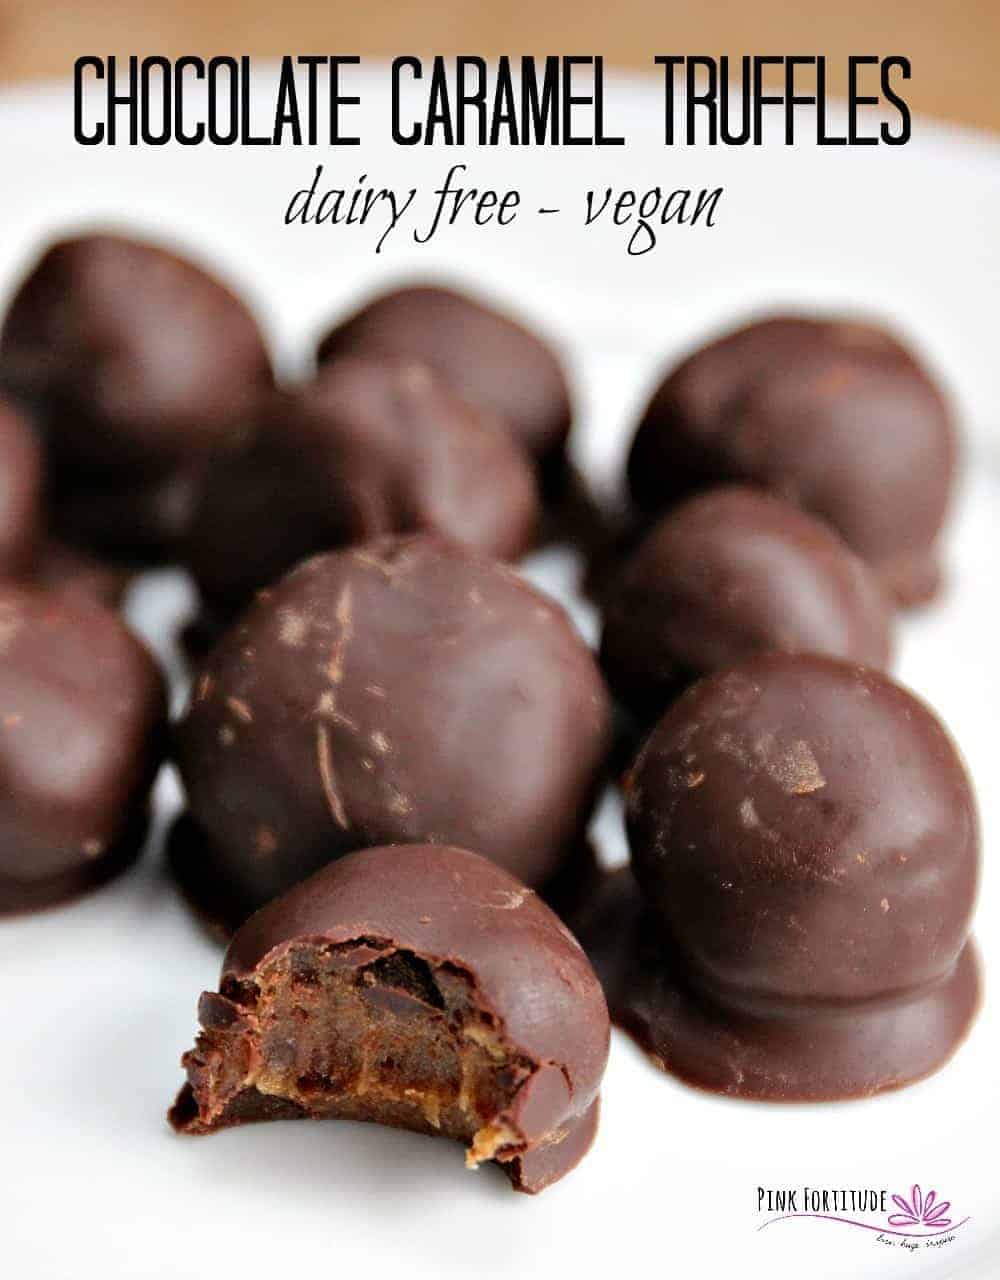 Vegan truffles filled with a date caramel and covered with dark chocolate.